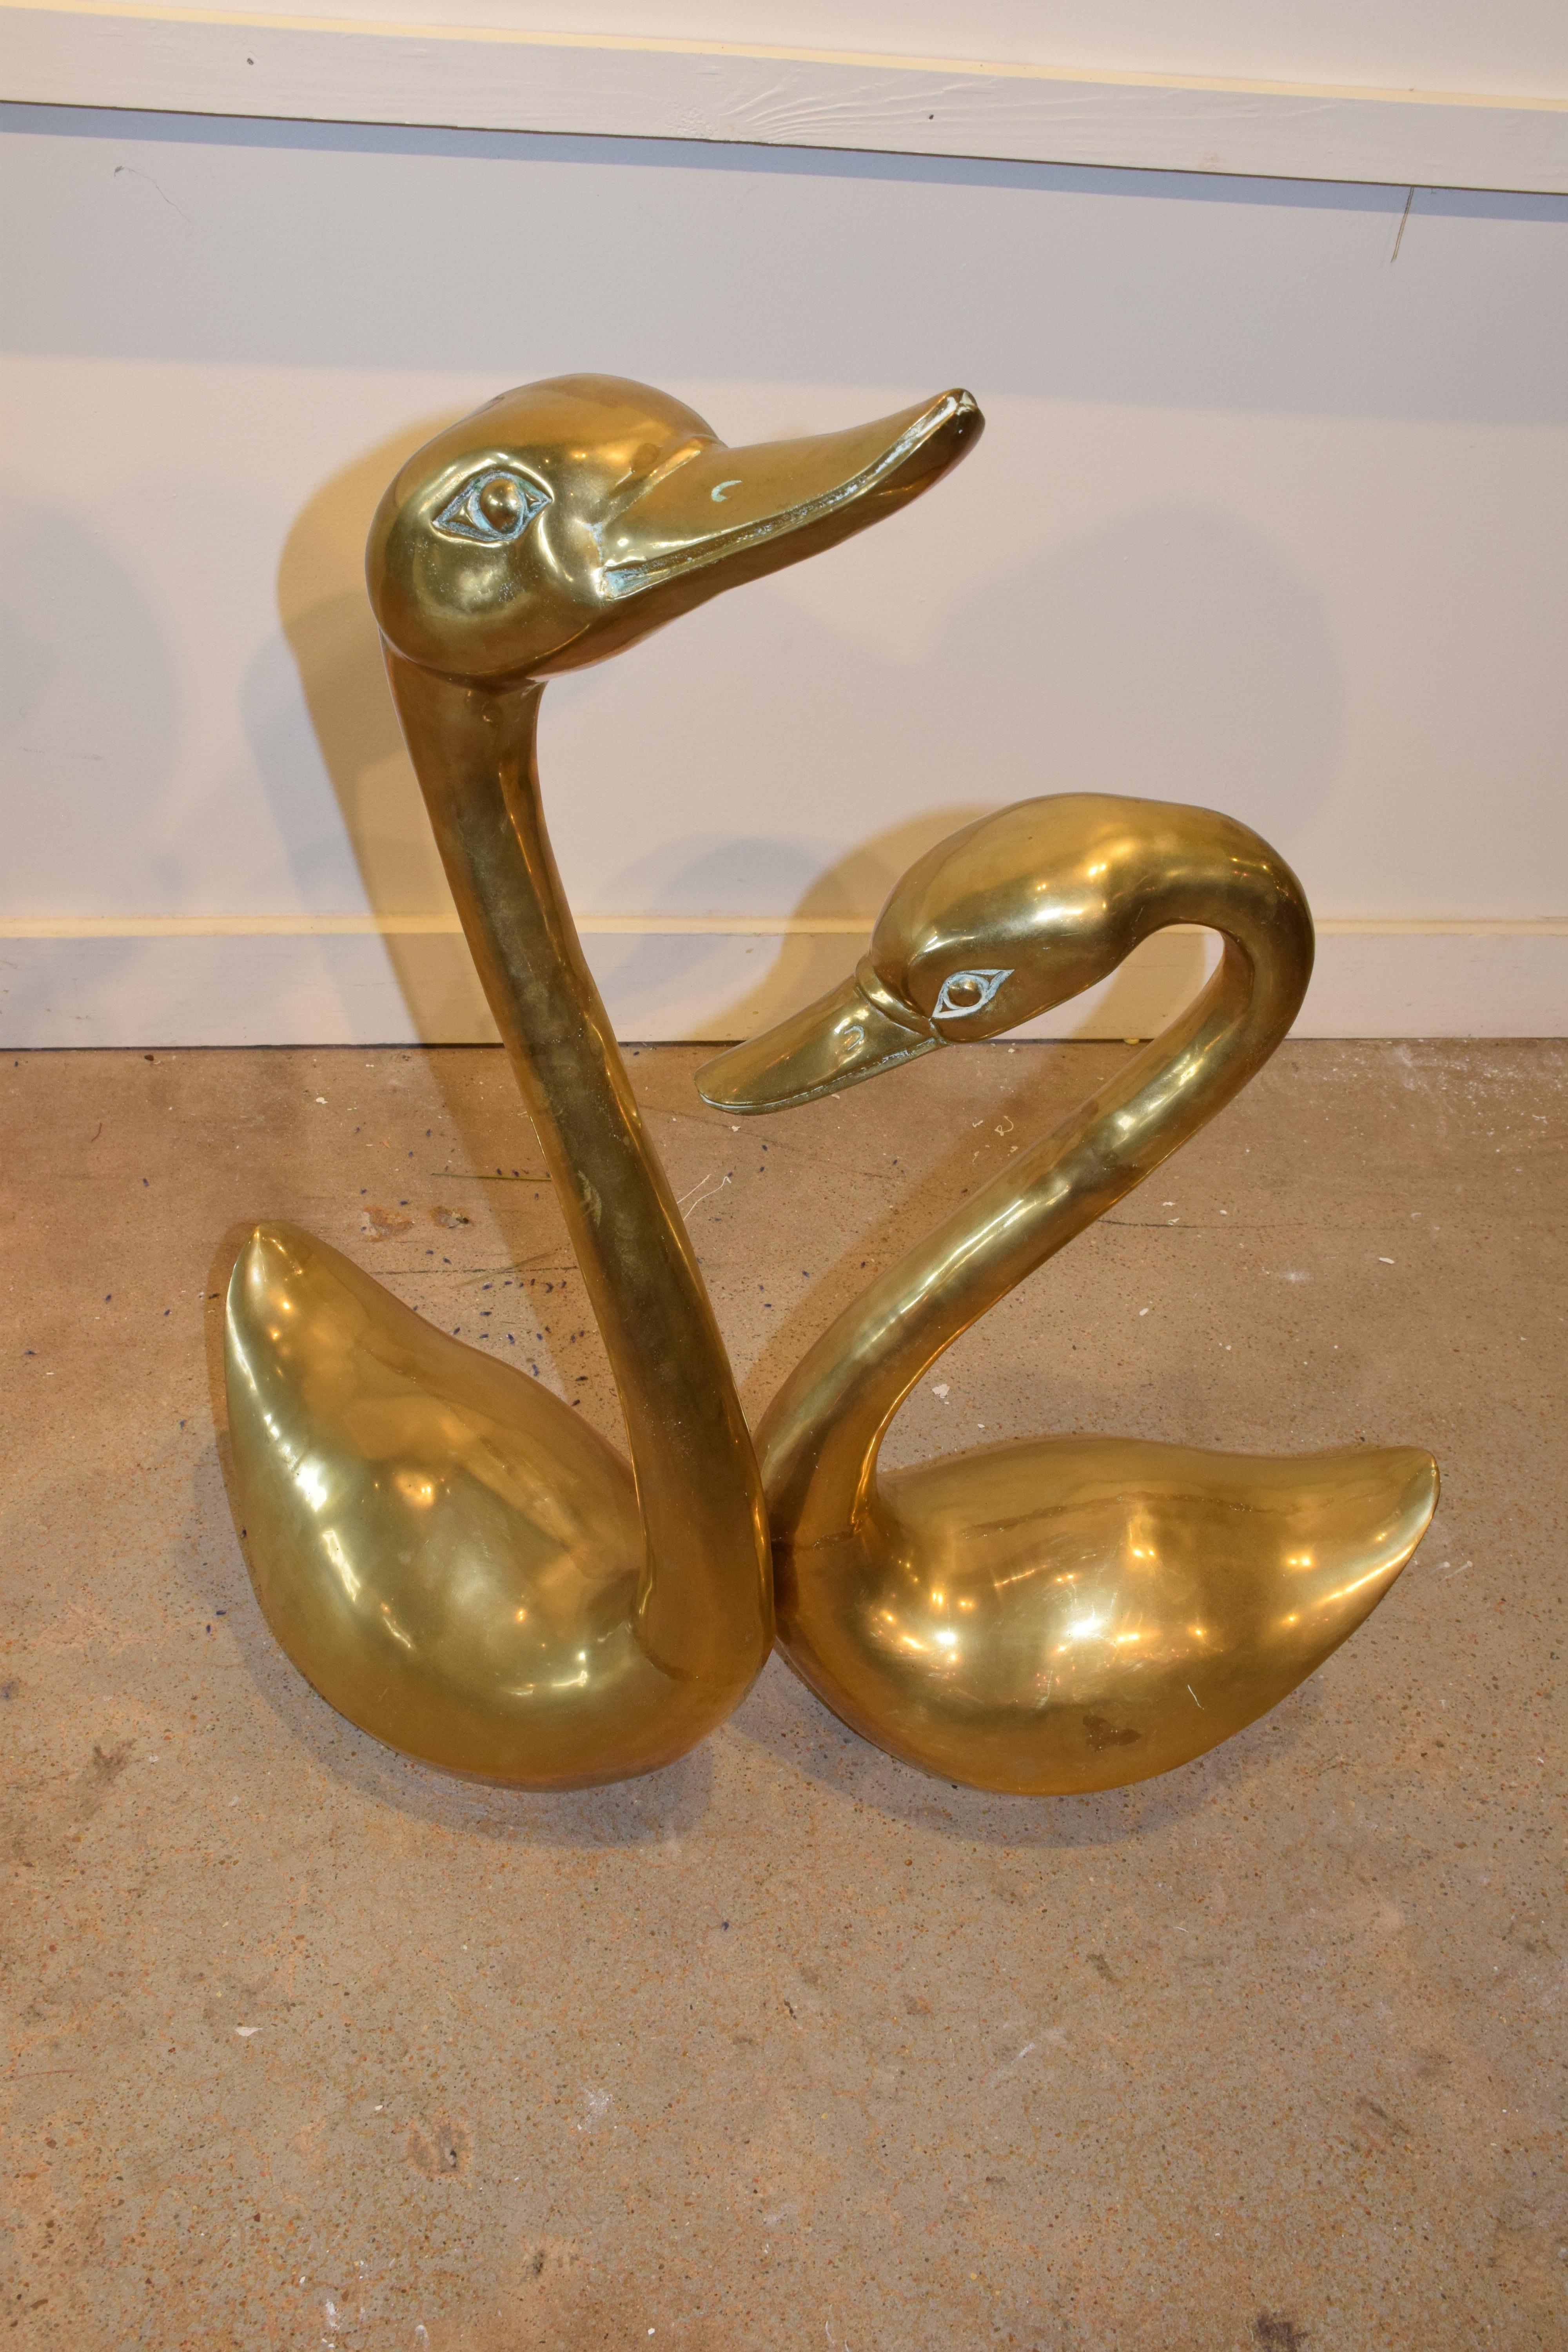 These beautiful brass midcentury swans would be a great addition to your home. This lovely pair will add a bit Mid-Century Modern used as a table centerpiece or resting on the floor. The larger swan measures 29 inches high, 13.5 inches wide and 8